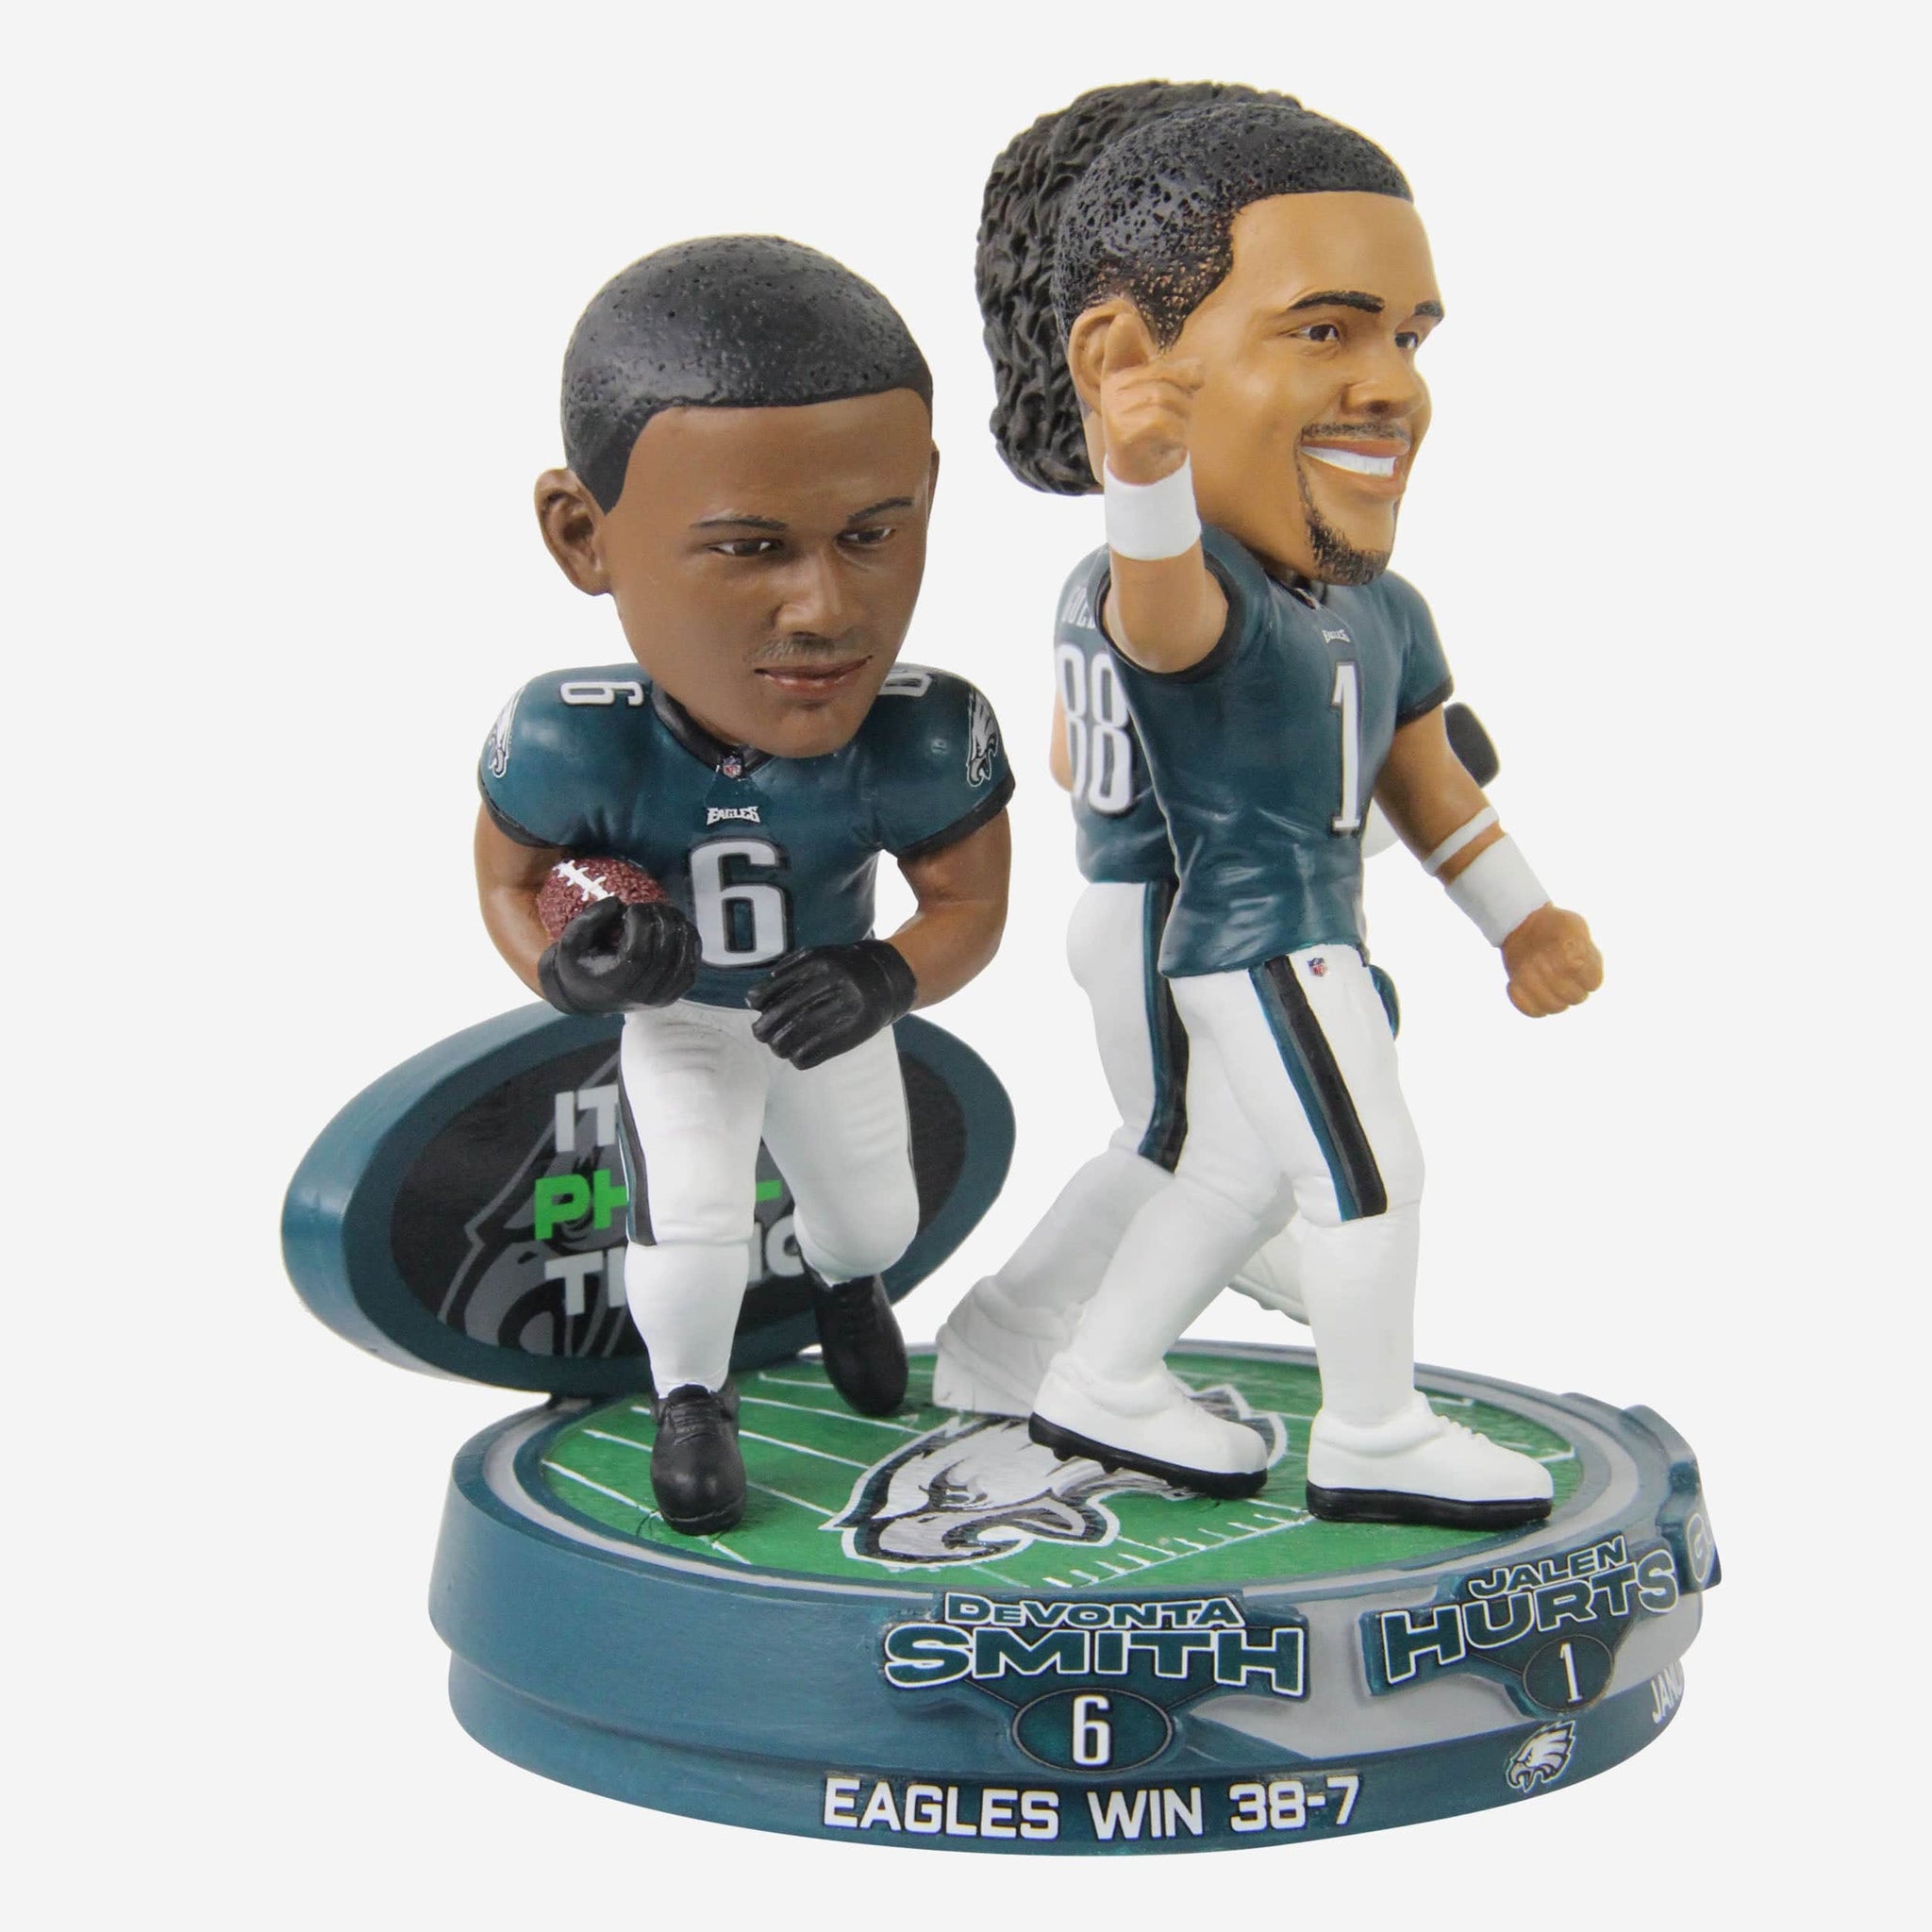 Philadelphia Eagles It’s A Philly Thing Mini Bobblehead Scene Officially Licensed by NFL